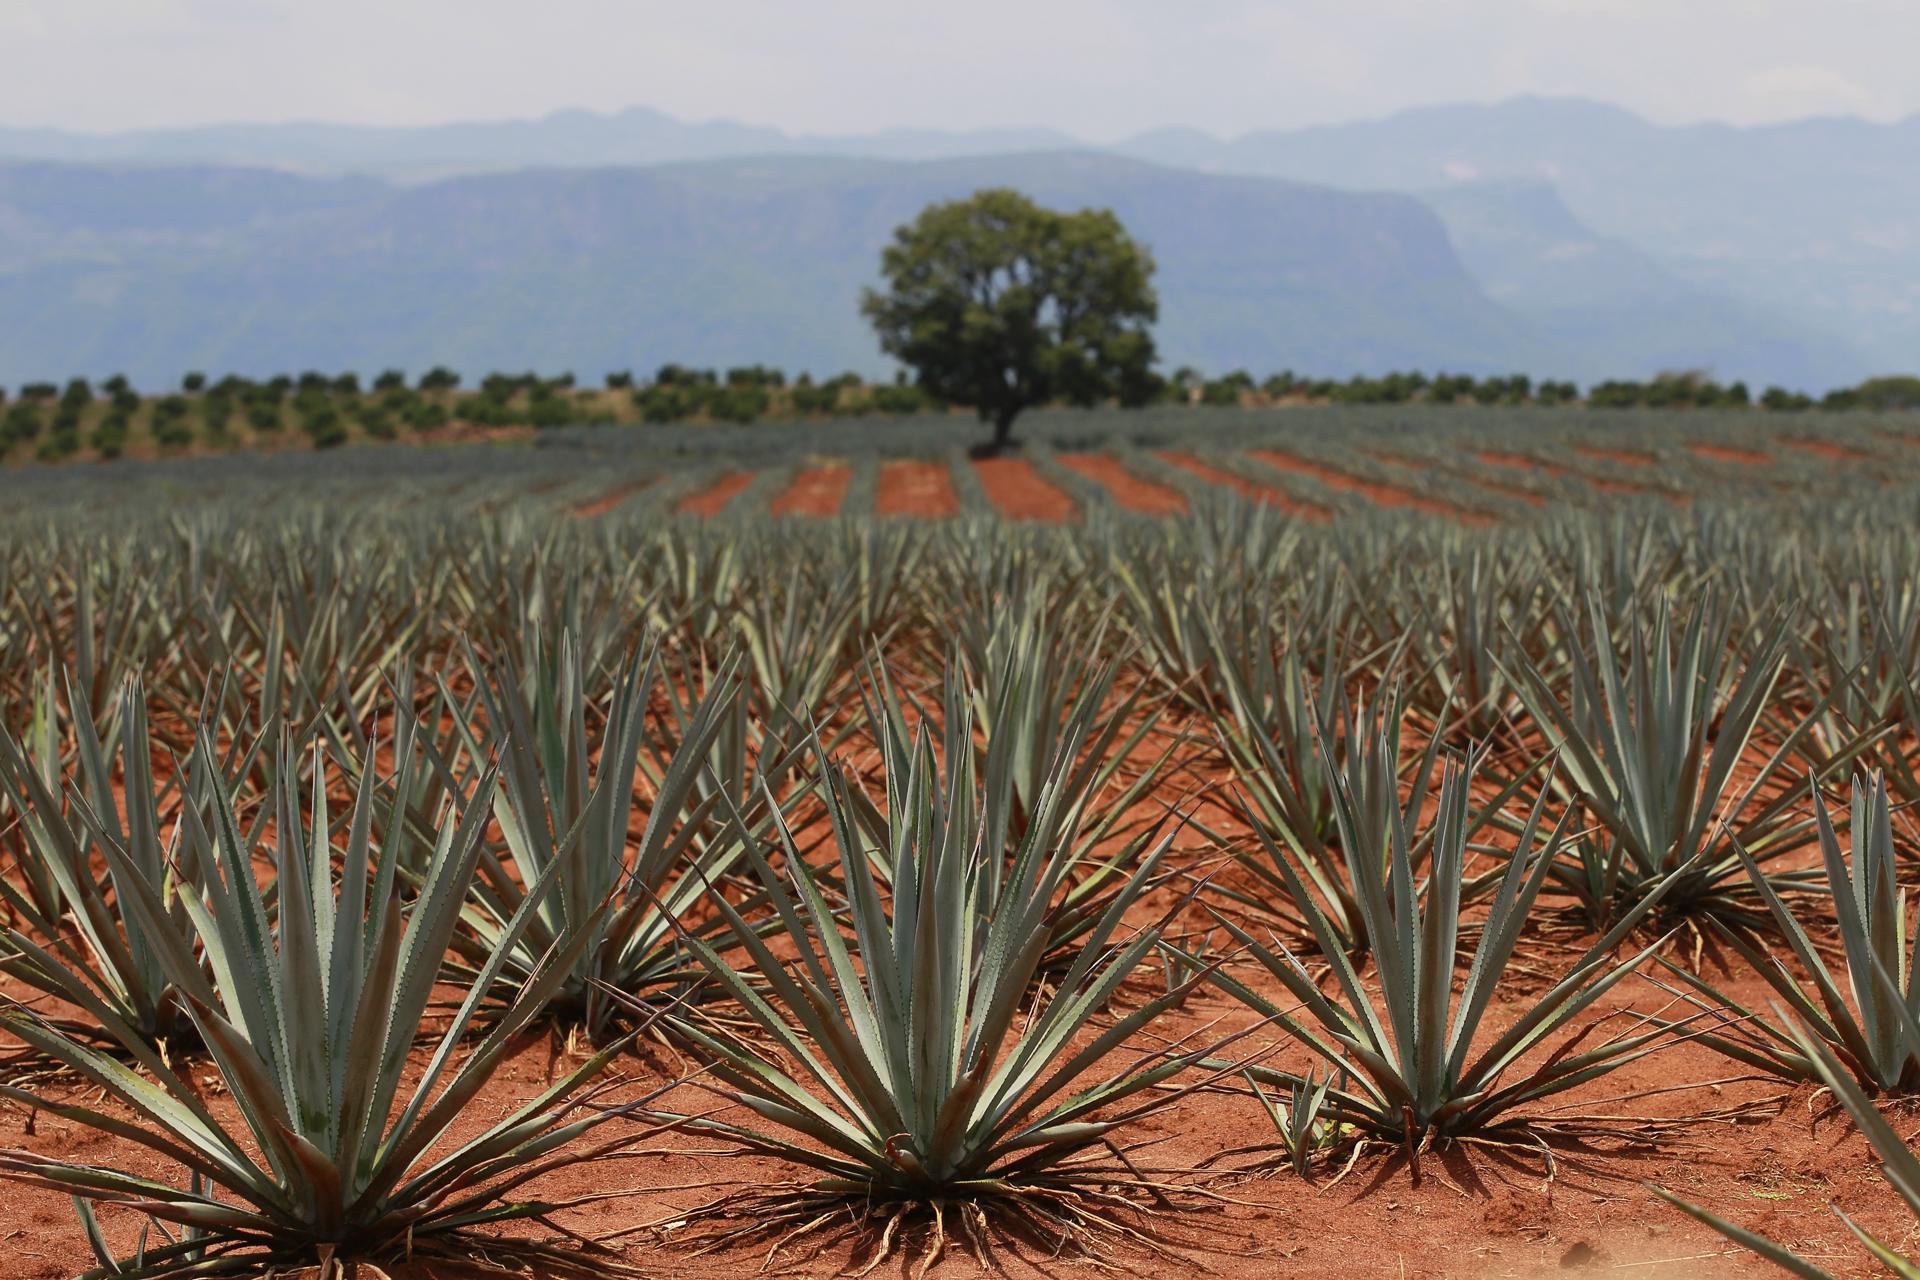 Photograph of agave fields in the town of Tequila, Jalisco (Mexico). EFE/ Francisco Guasco
